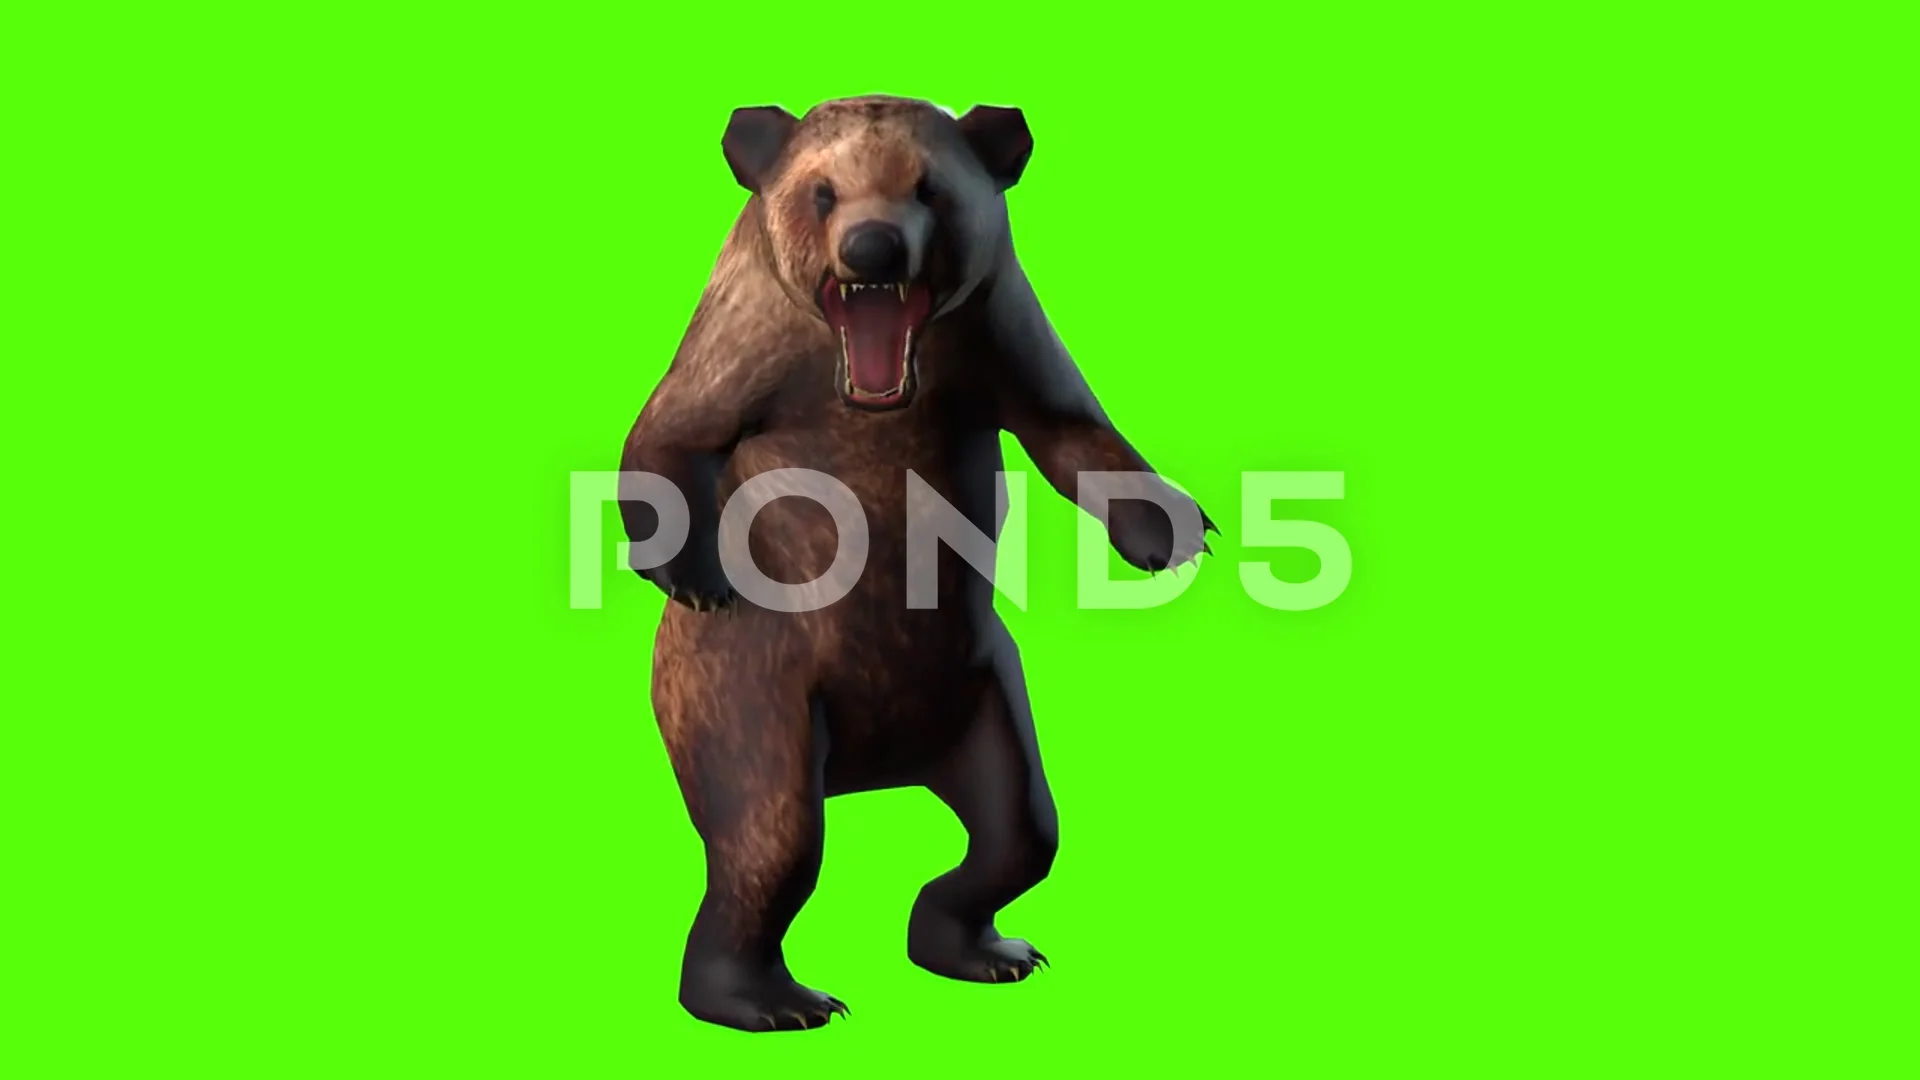 BEAR SOUND EFFECTS - Bear Roaring and Growling Sound 